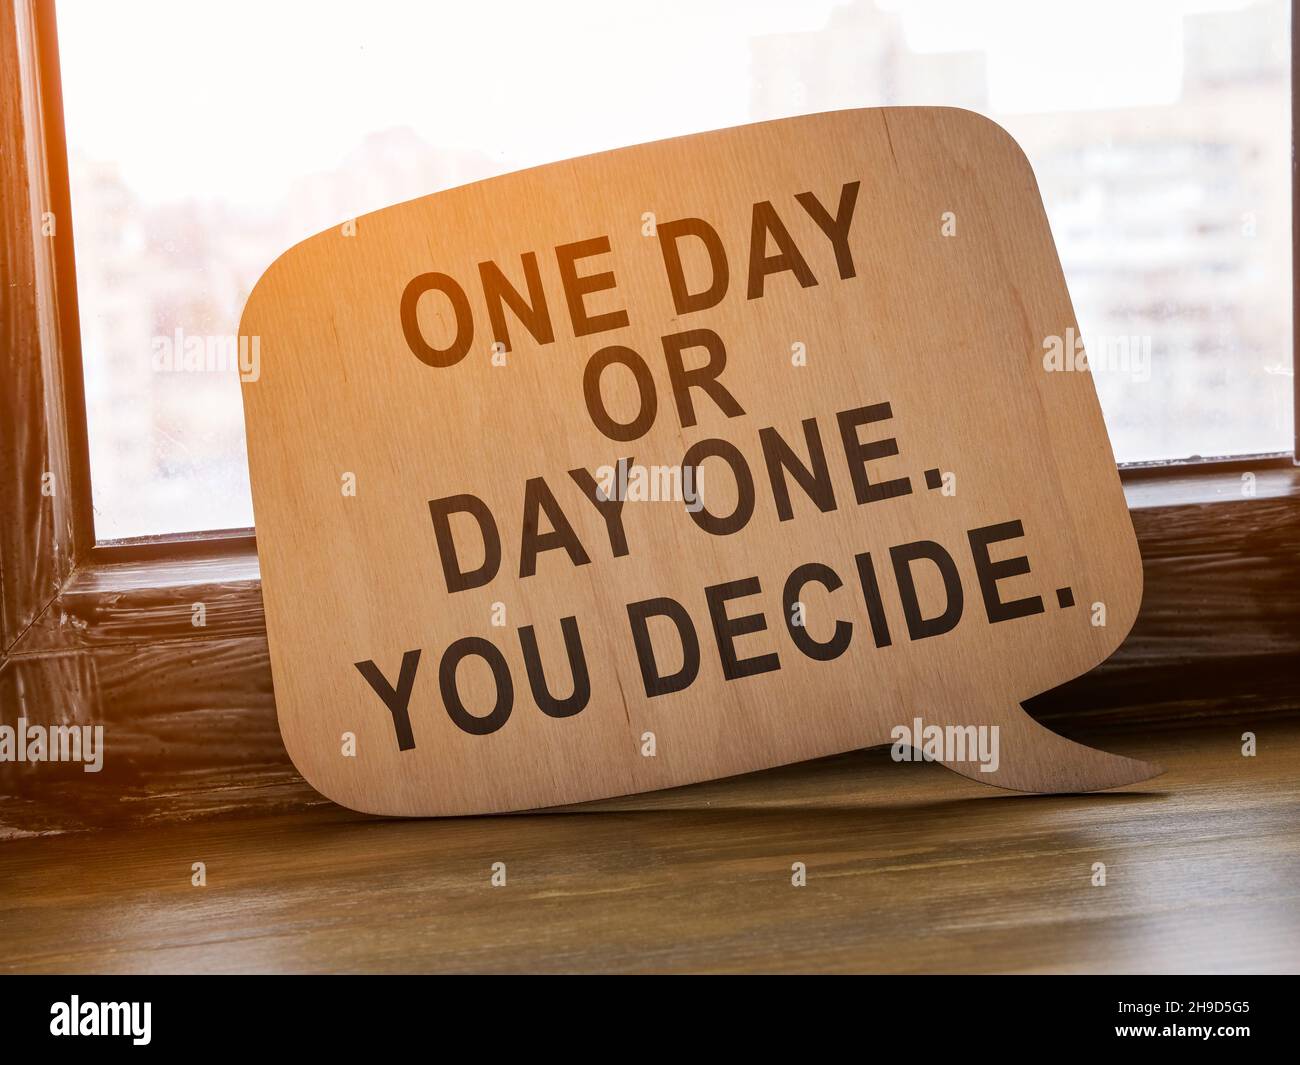 One day or day one you decide. Motivational phrase. Stock Photo